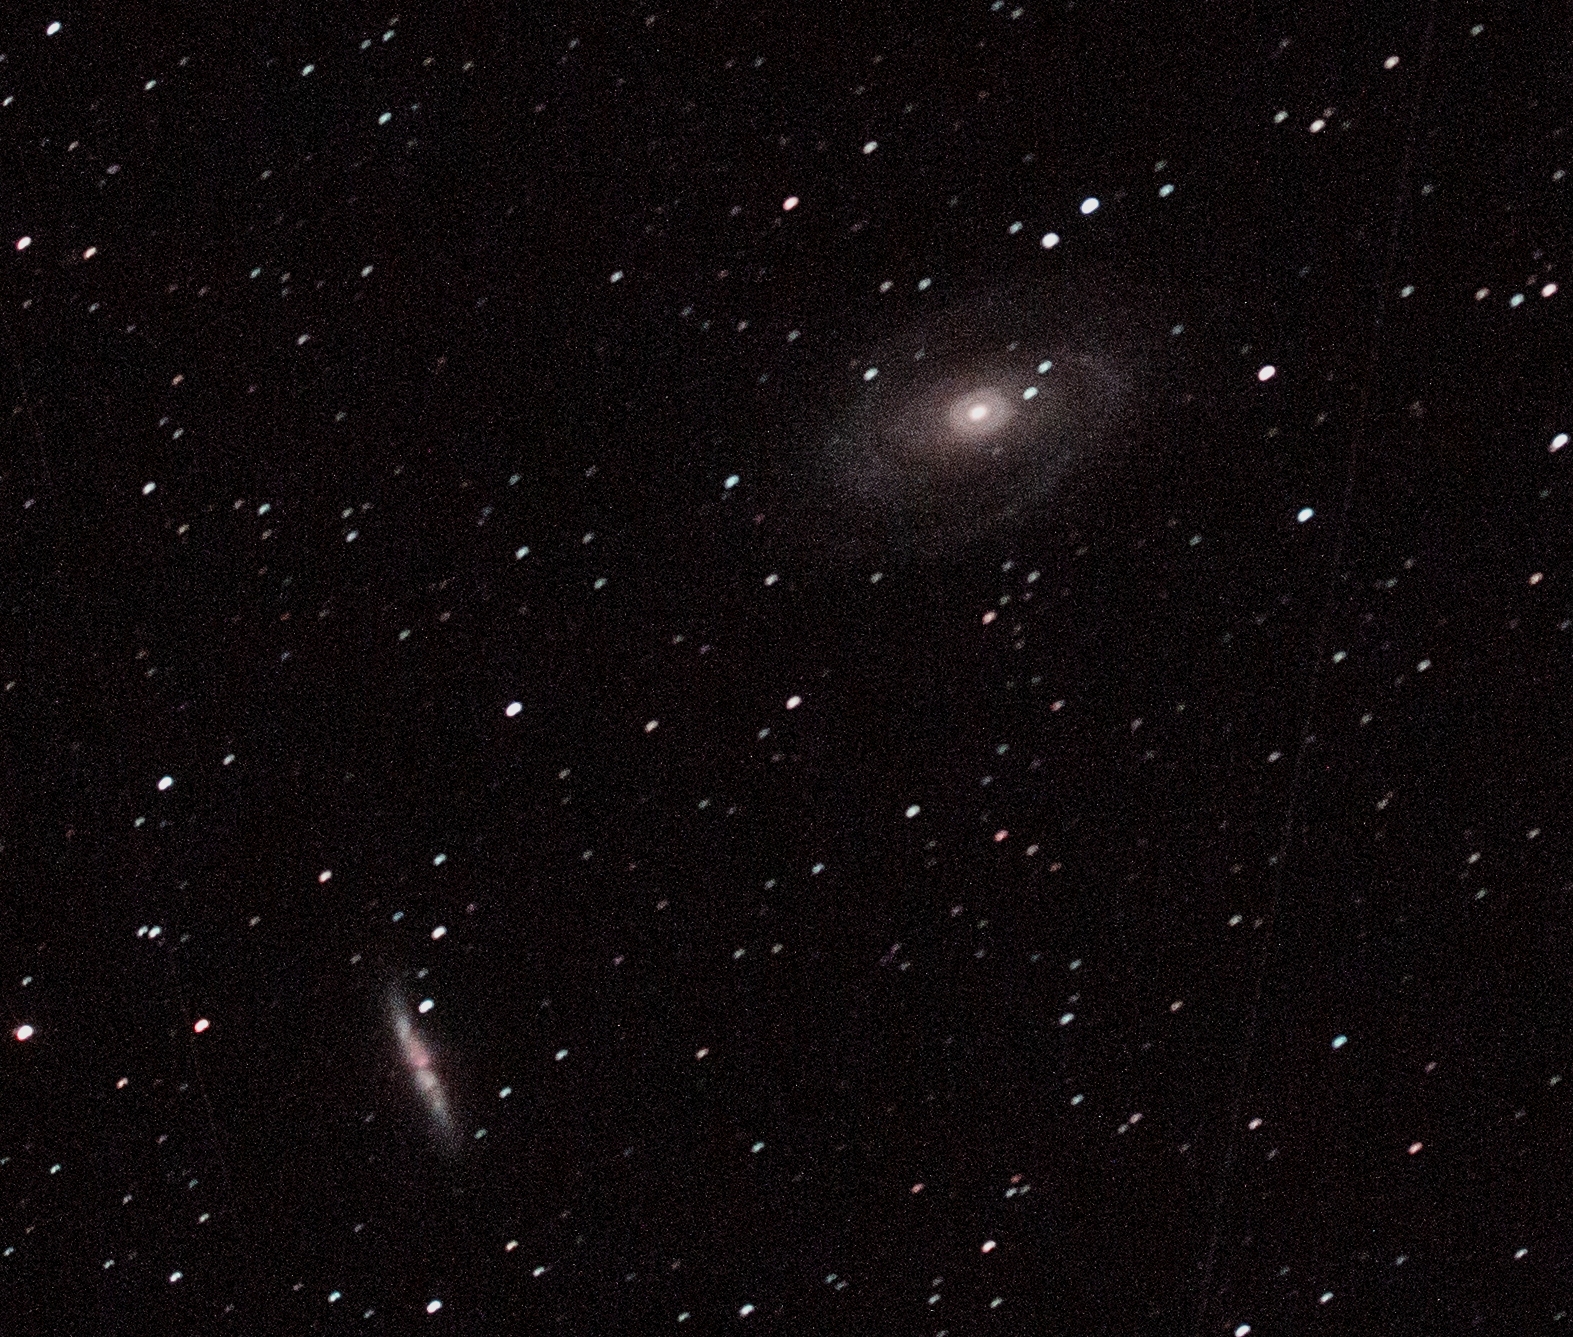 M81 and M82 - Bode's Galaxy and the Cigar Galaxy